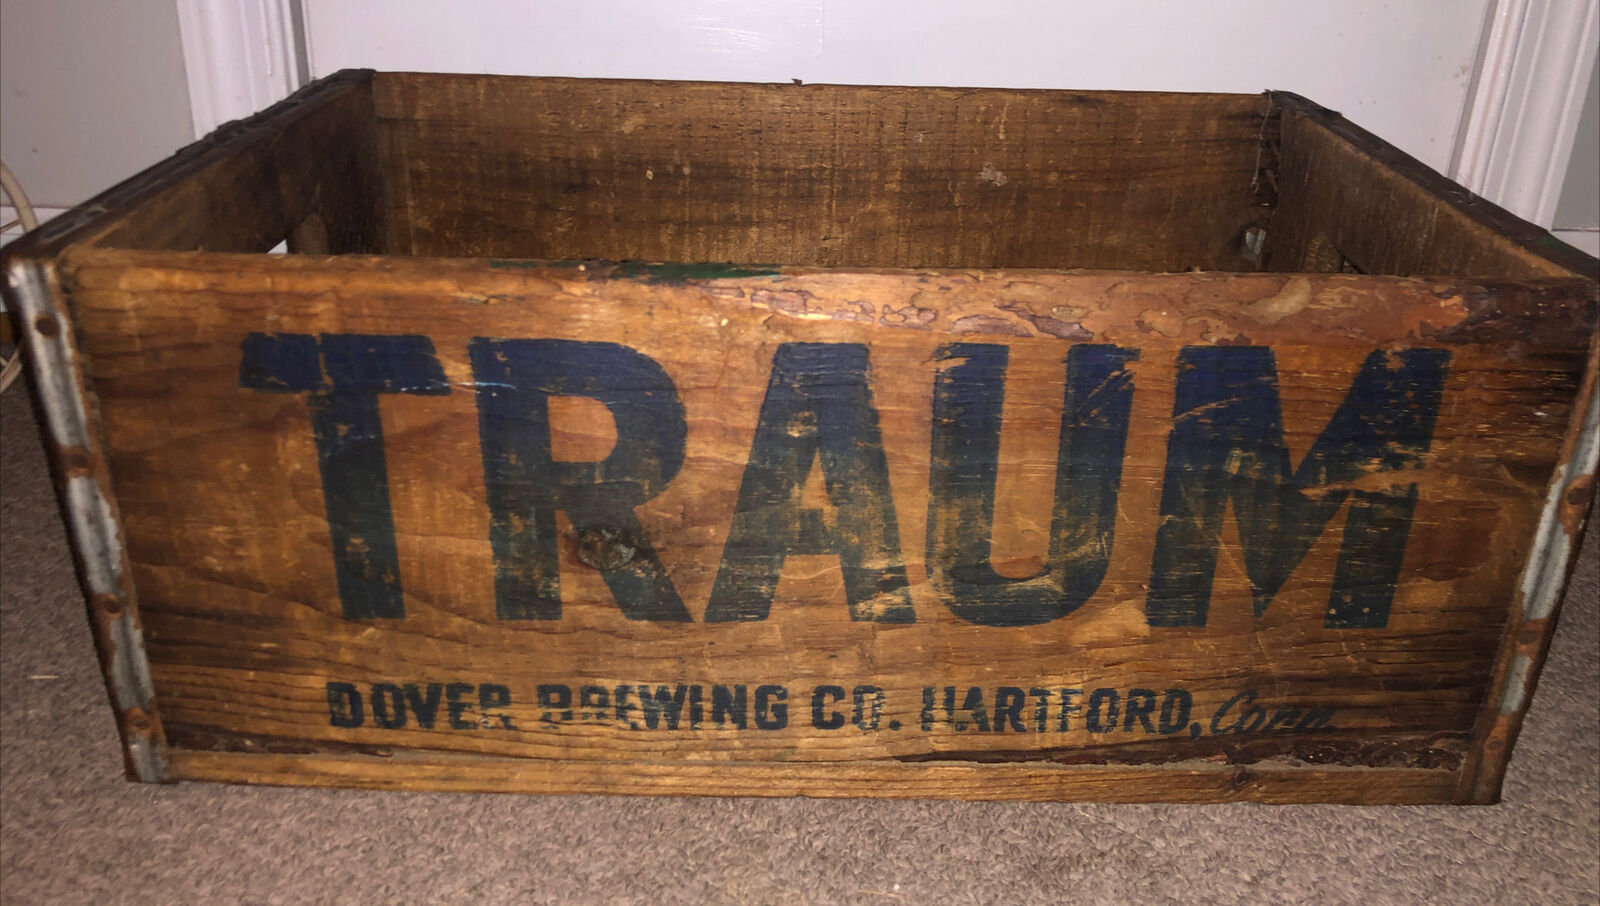 VINTAGE 40S TRAUM DOVER BREWING CO. METAL BANDED WOOD BEER CRATE HARTFORD, CT